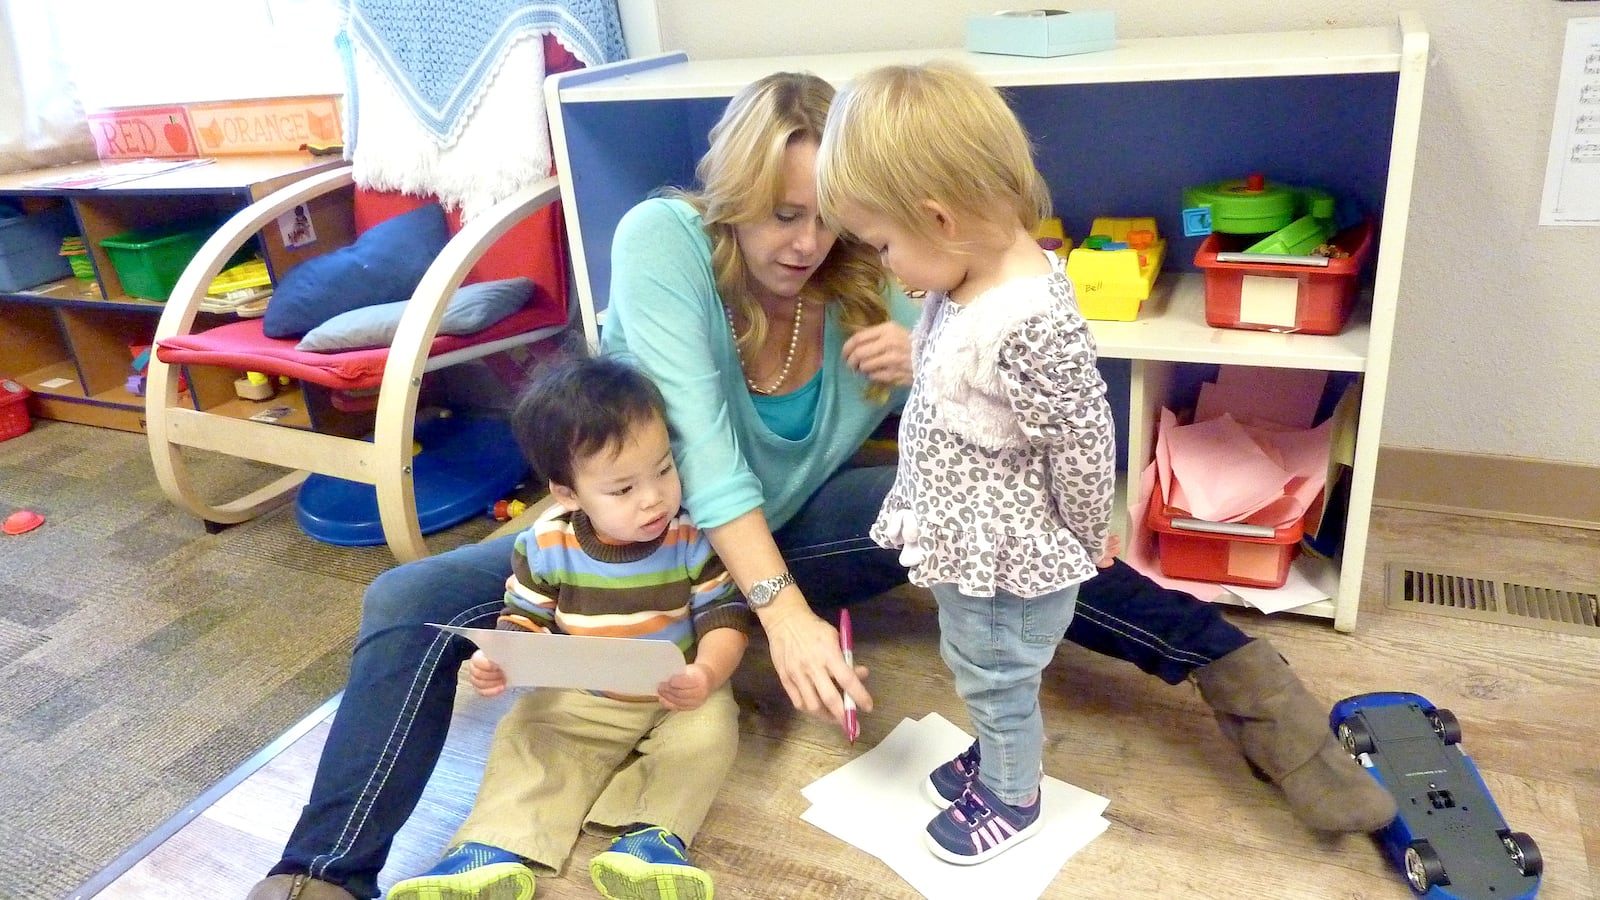 Loveland's Teaching Tree Early Childhood Learning Center was one of the first two centers in the state to get a Level 5 rating in the Colorado Shines rating system.